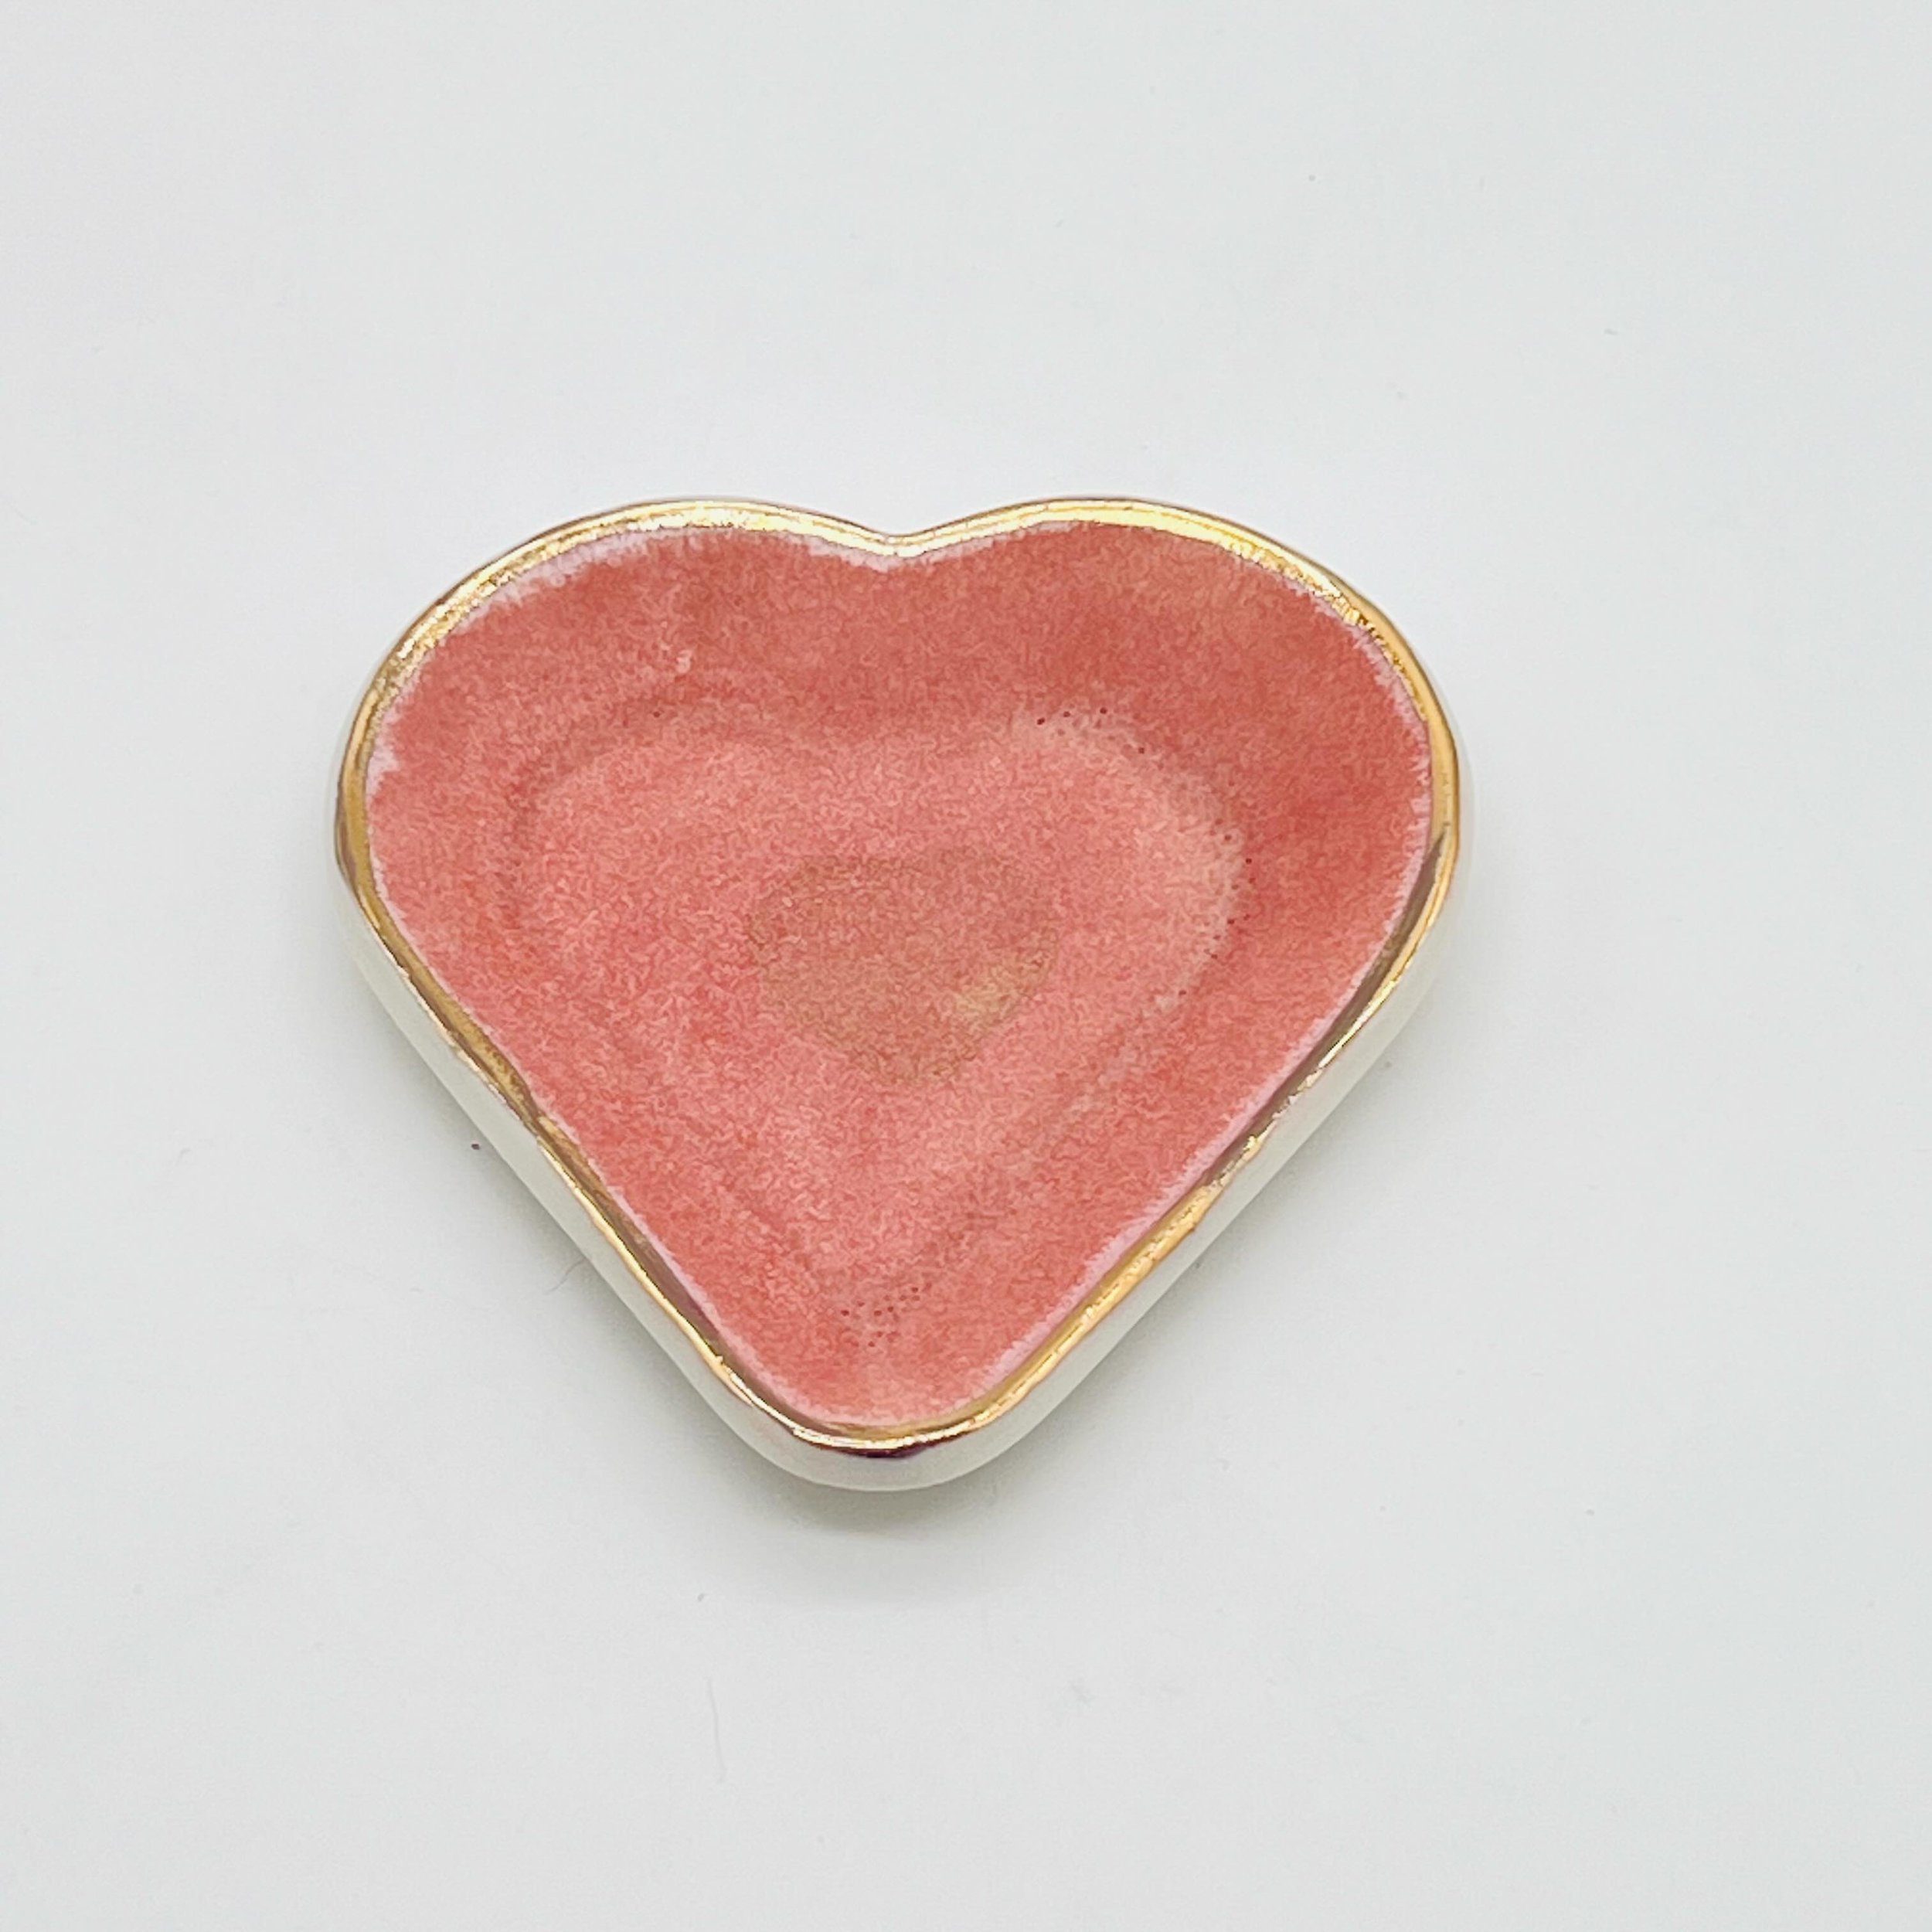 A simple heart in muted pink. Understated yet fierce. 💖🌸💕 Perfect for mom. 
.
.
.
#pinkheart #pinkhearts #heartdishes #heartdish #giftformom #mothersday #trinketdish